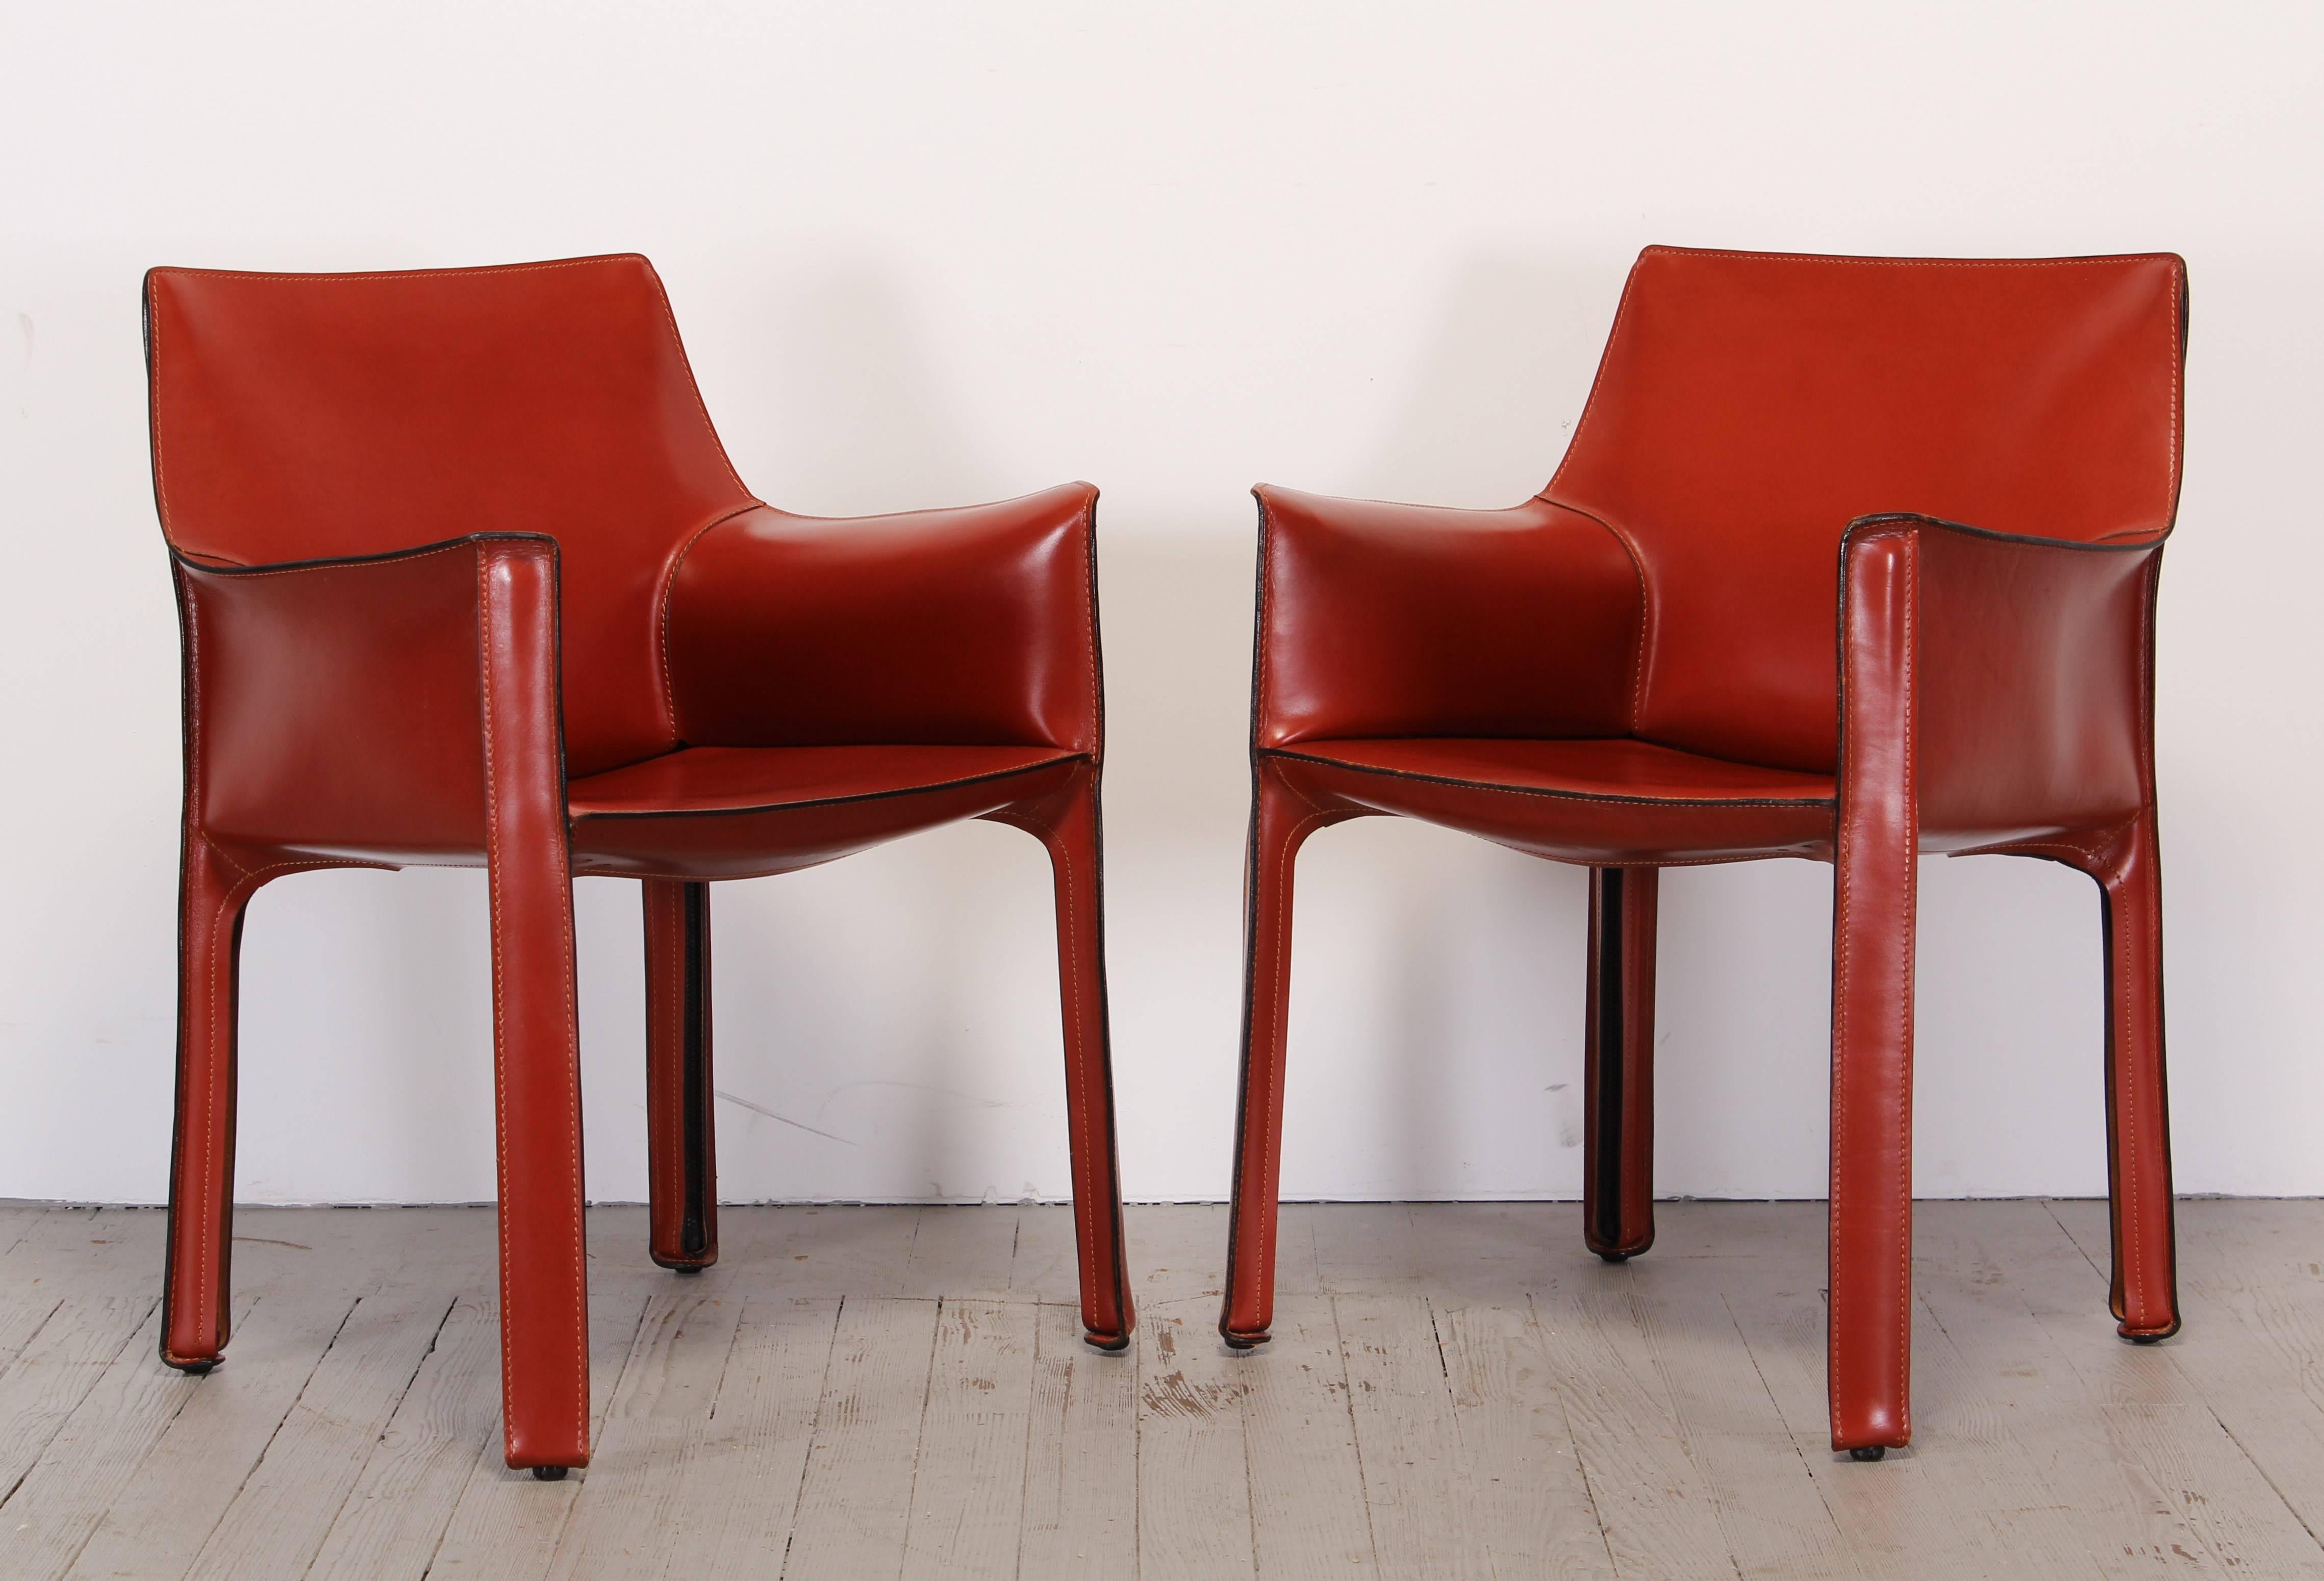 An orange-red leather pair of 413 cab chairs by Mario Bellini. The seat is padded with polyurethane foam under an enamelled steel frame. Leather upholstery zippered over the frame. The chair is now part of the permanent collection at the New York